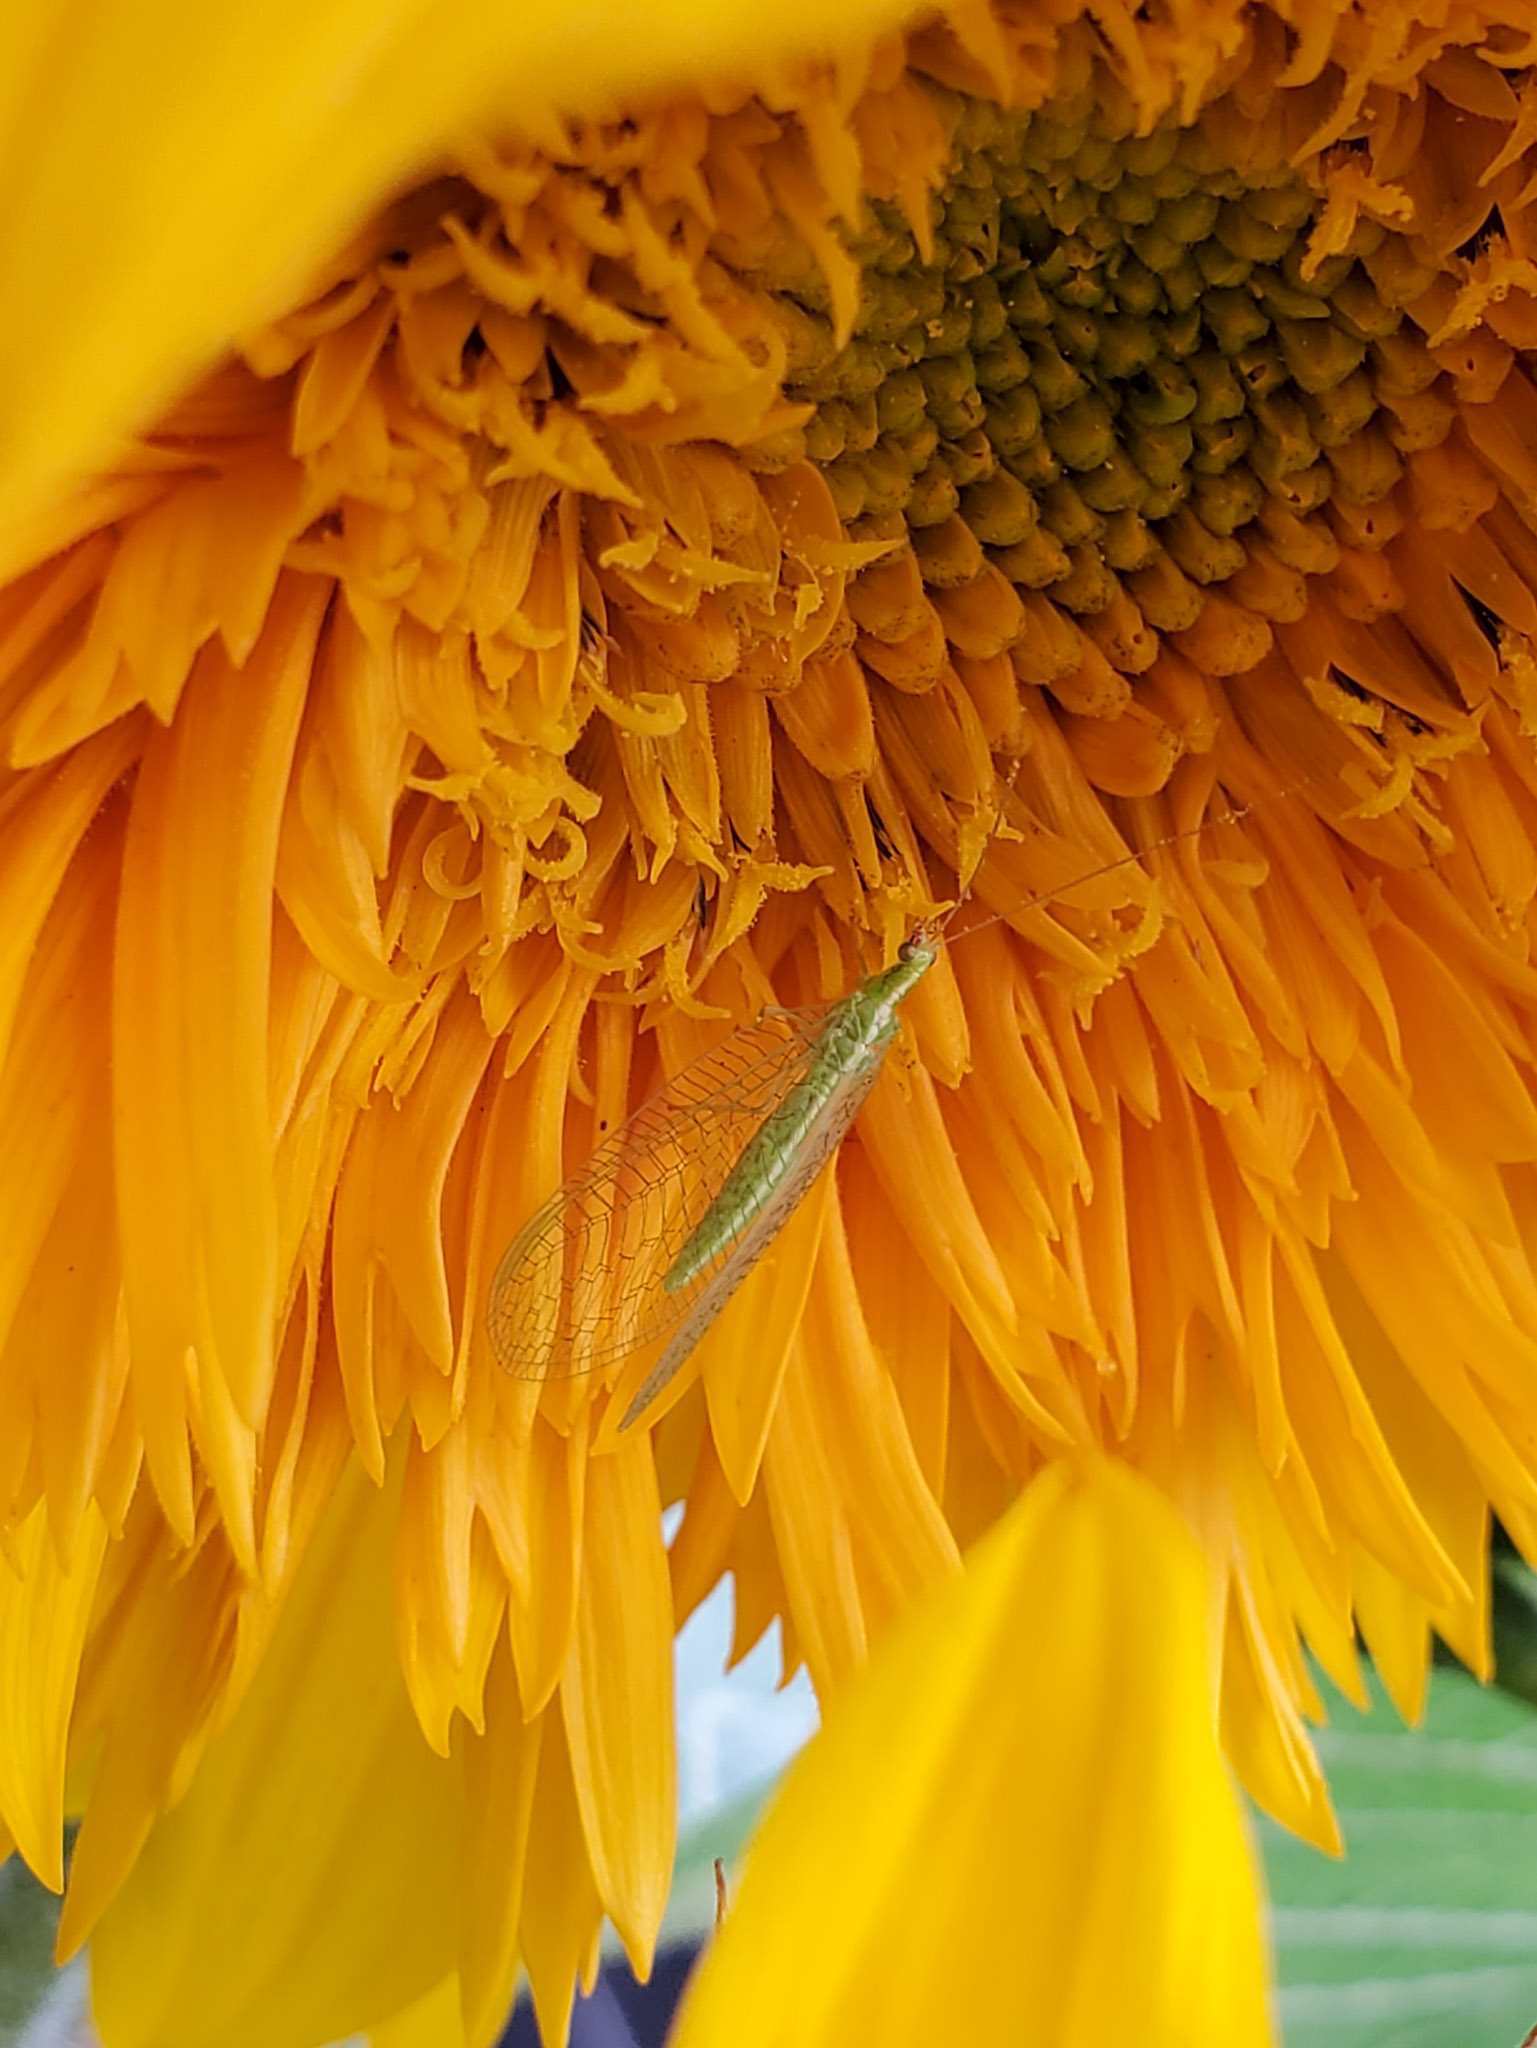 A close up image of a green lacewing resting on the face of a bright orange and yellow sunflower head. The pollen from the flower petals is visible amongst the beneficial insect. 